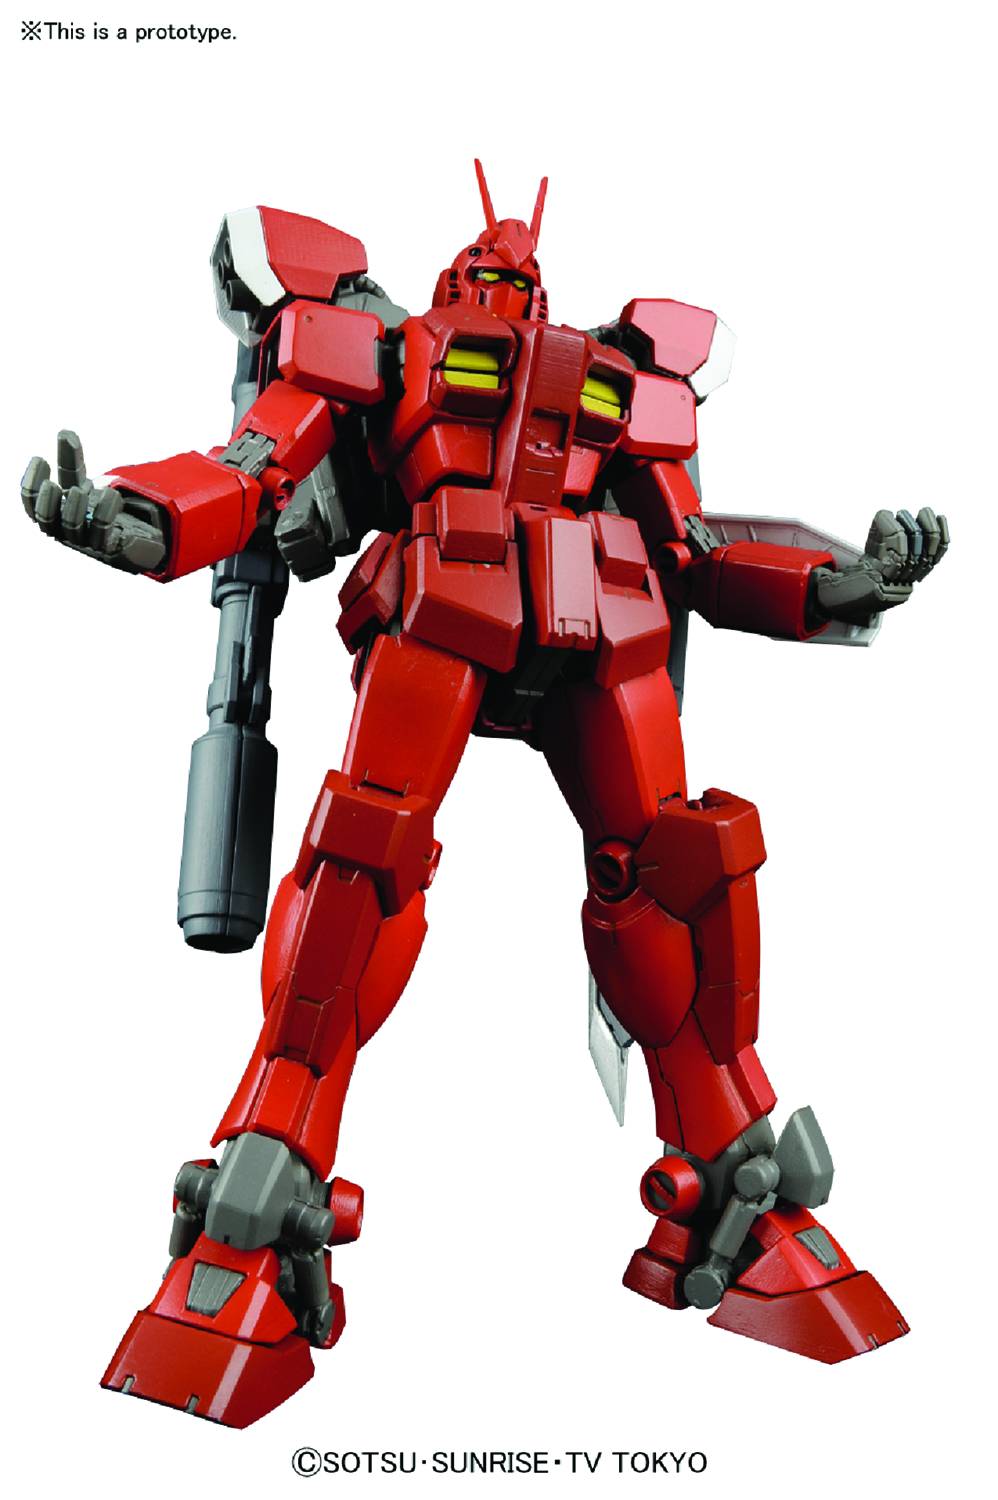 Gundam Build Fighters Try Amazing Red Warrior Master Grade 1:100 Scale Model Kit